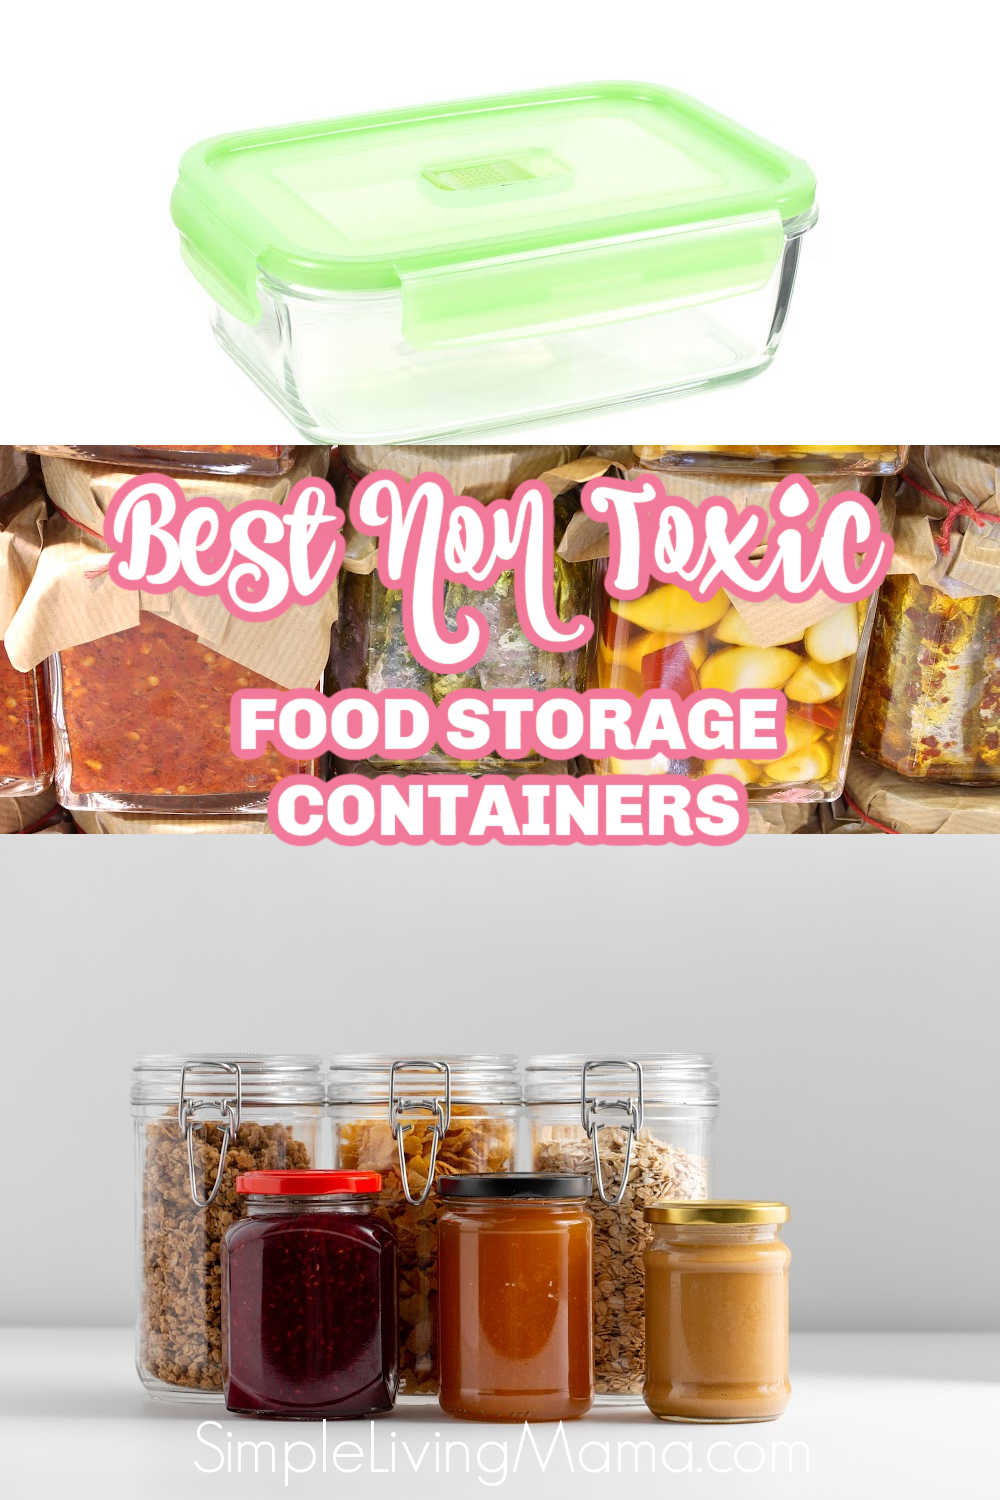 The Best Non Toxic Food Storage Containers - Simple Living Mama